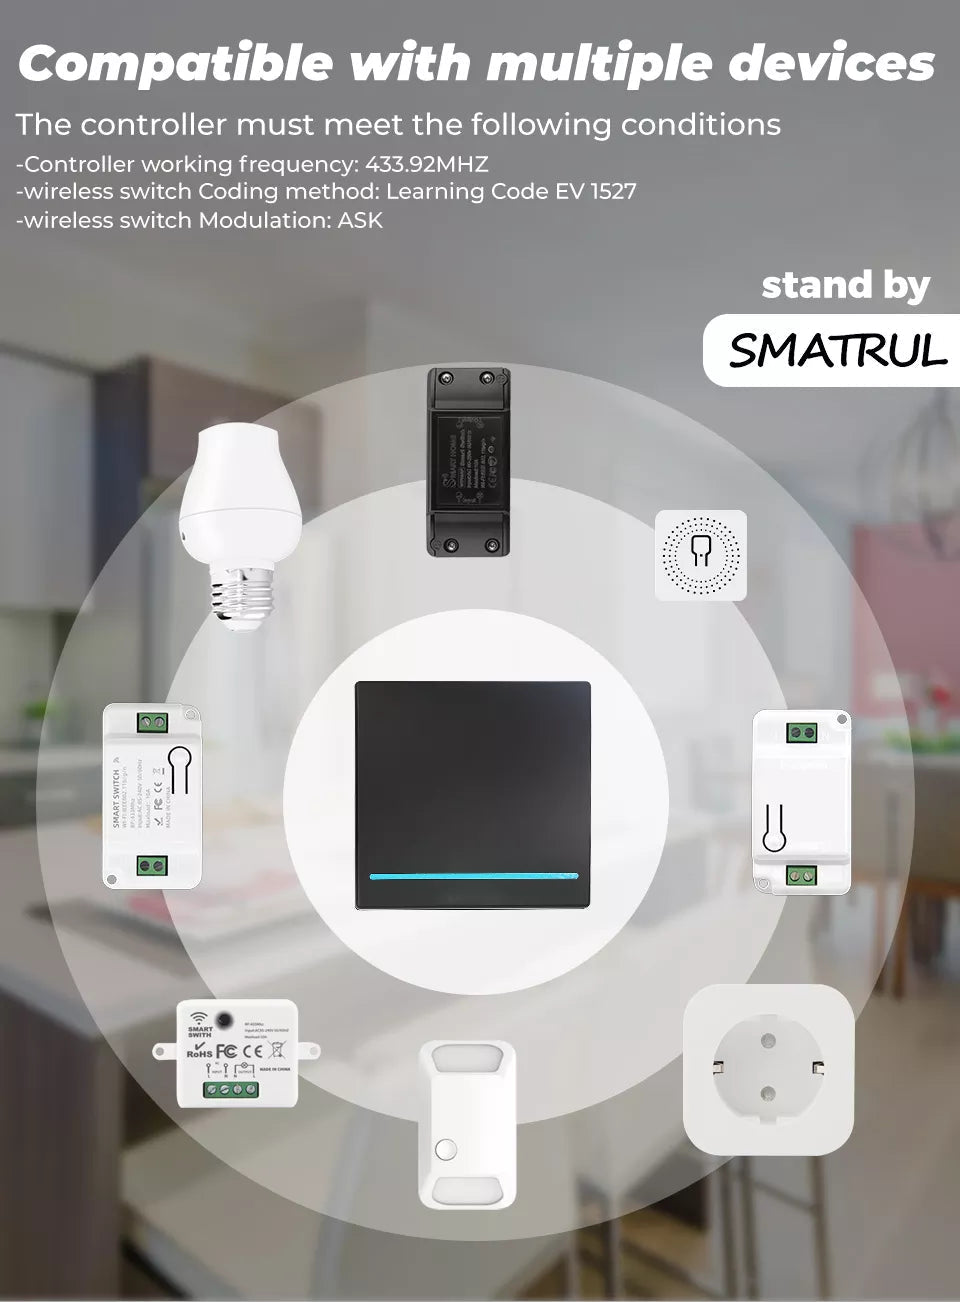 SMATRUL 3 Gang RF 433Mhz Smart Home Push Wireless Switch Light Remote Control Wall Button Ceiling Lamp On Off ASK Ev1257. White.